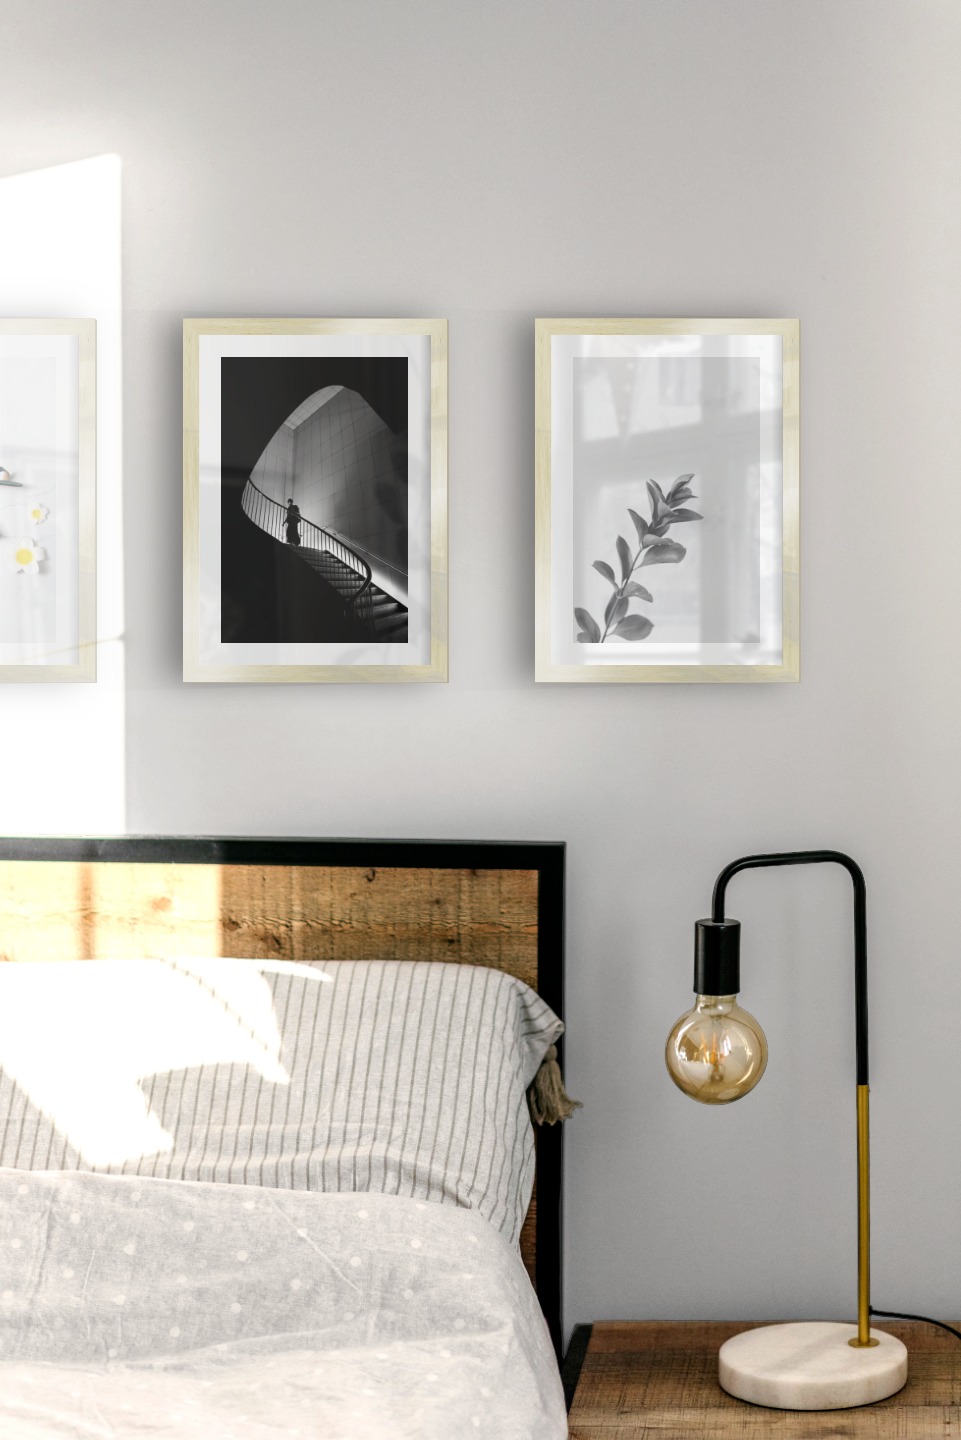 Gallery wall with picture frames in gold in sizes 21x30 with prints "Heels", "Staircase" and "Twig"